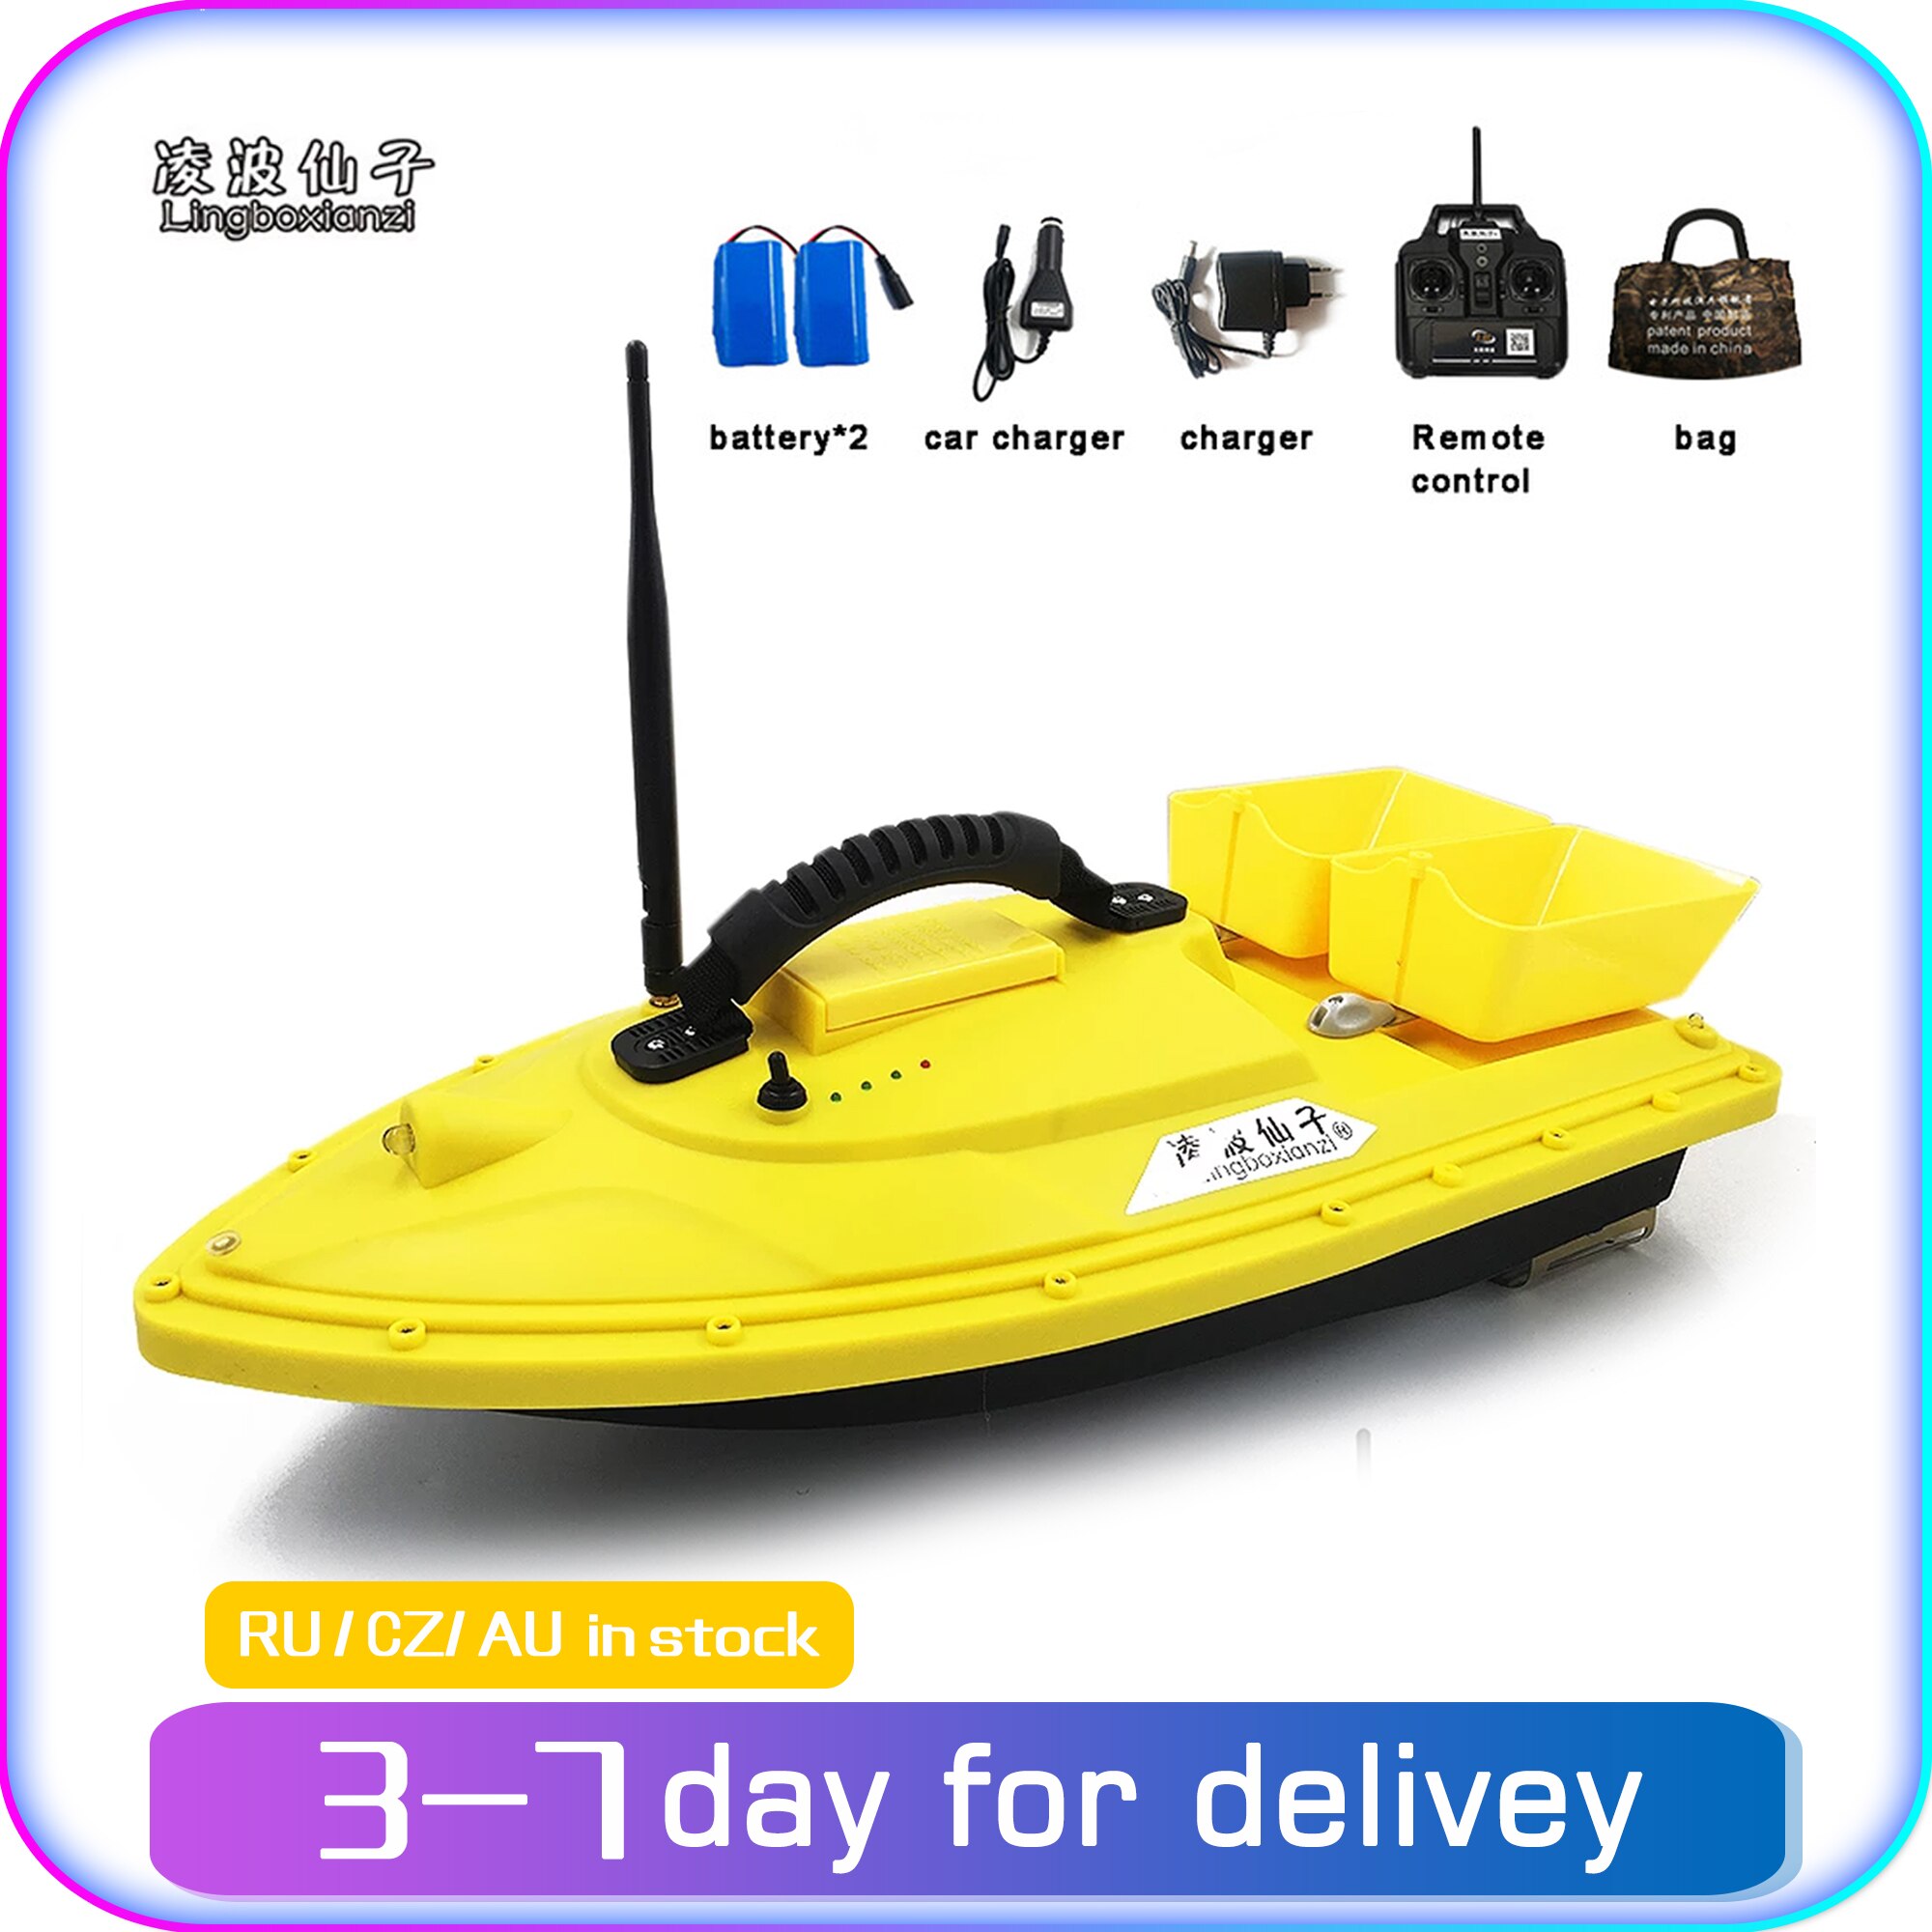 Lingboxianzi T188 Night Light RC Distance Auto Lure Fishing Smart Remote Control Bait Boat Toy Fish Finder Wireless 1.5KG 500M